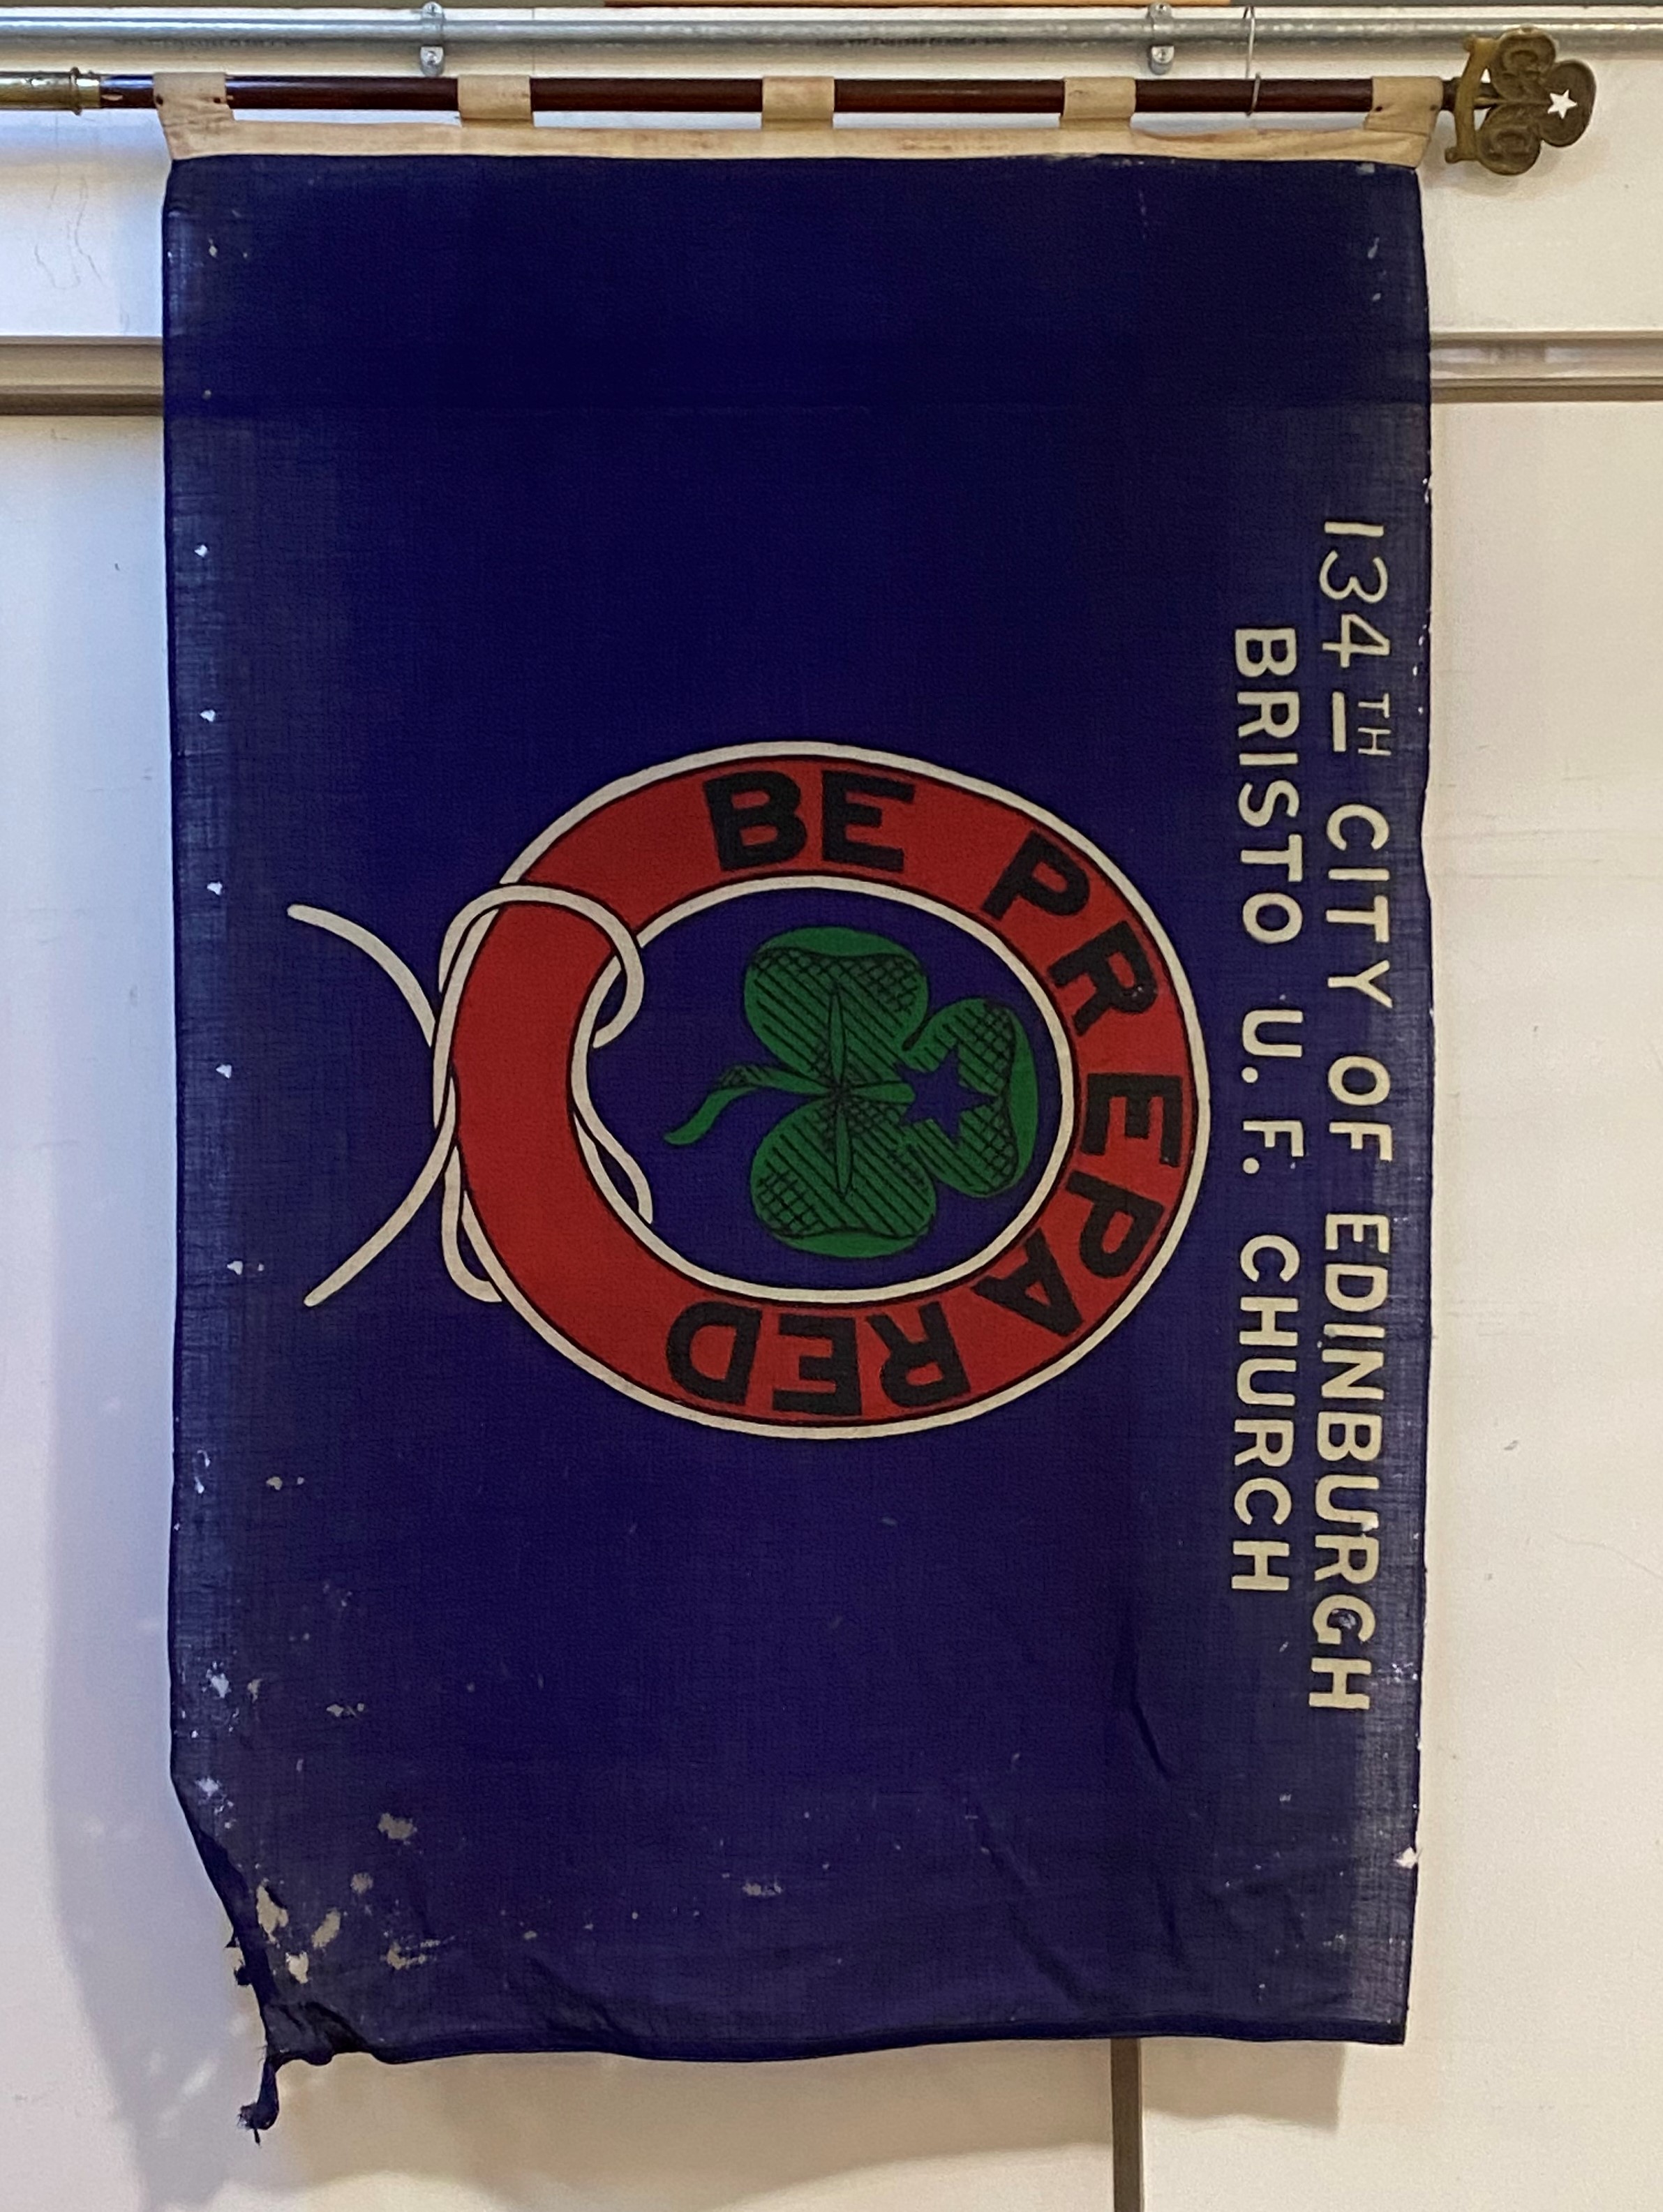 Girl Guides flag, topped with cast brass Guides badge, the flag of printed cotton 134th CITY OF